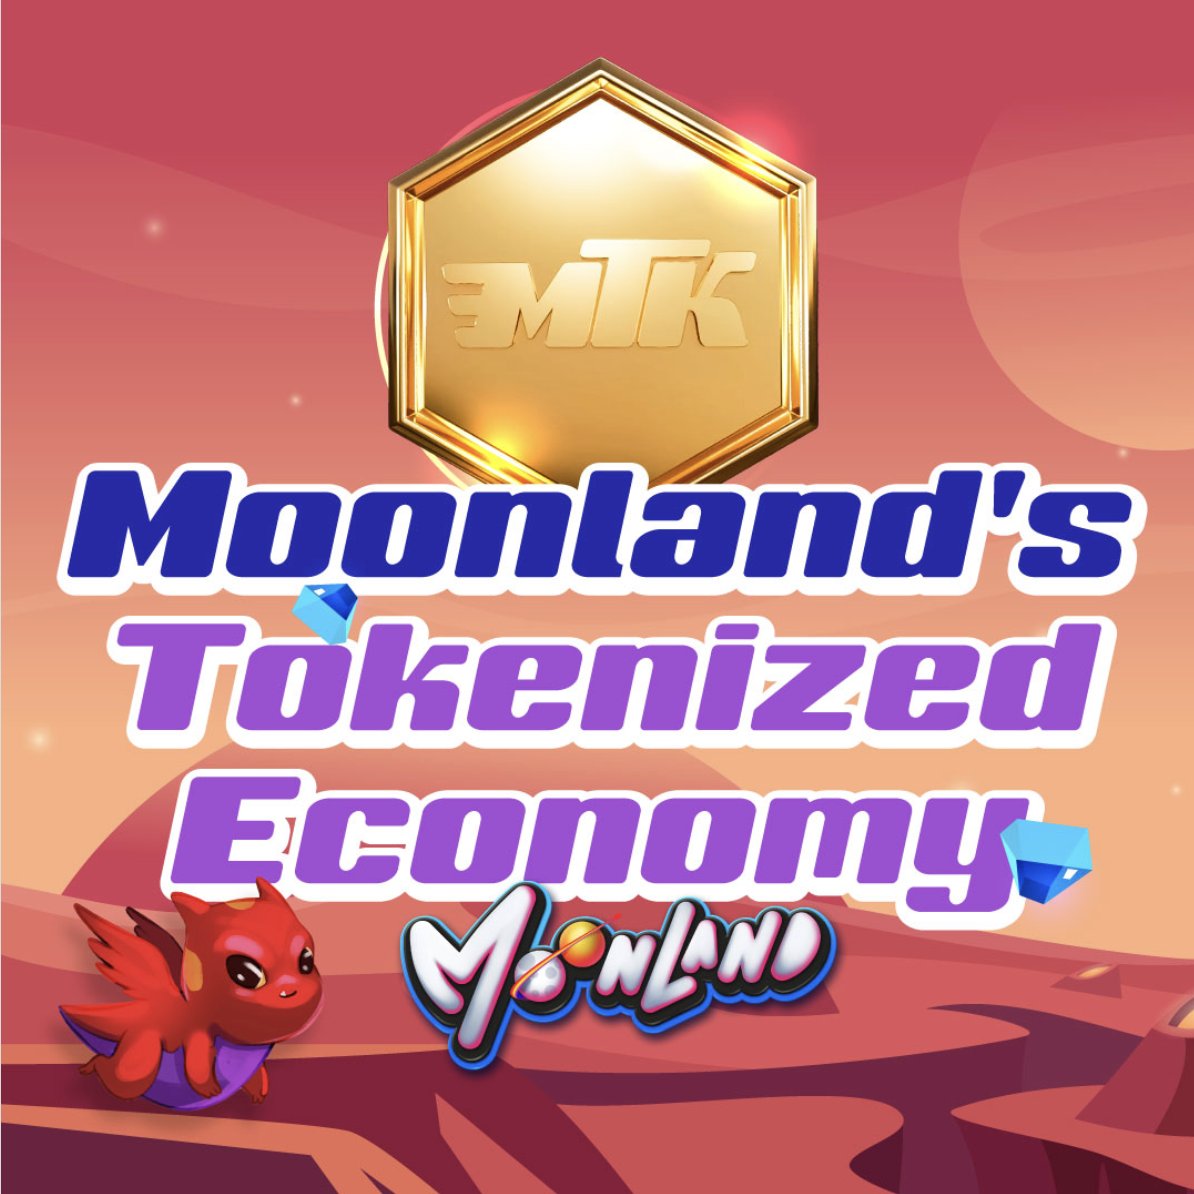 In #Moonland's metaverse, the decentralized economy is powered by #NFTs and #MTK tokens. In Moonland, you will take charge, be able to earn tokens, own your in-game assets, and participate in epic events within the virtual world. 🔥 #metaverse #crypto #cryptogame #cryptocommunity